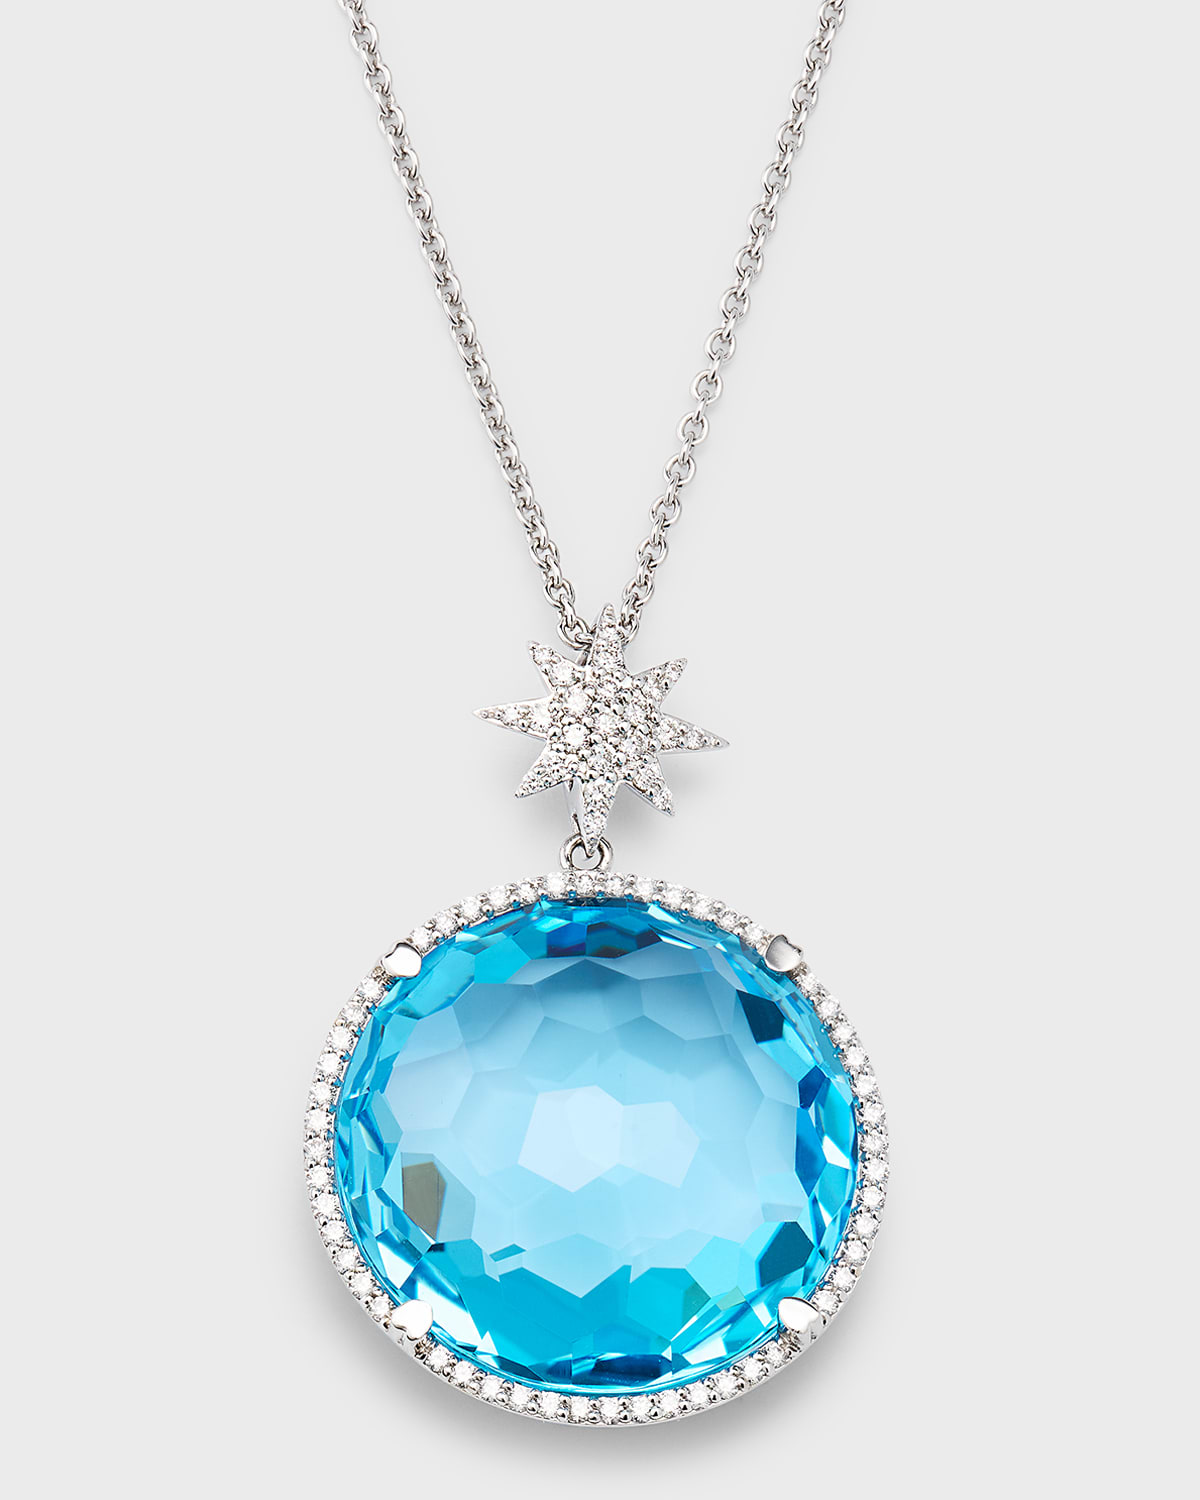 Lisa Nik 18k White Gold Round Blue Topaz And Diamond Necklace With Star Bail